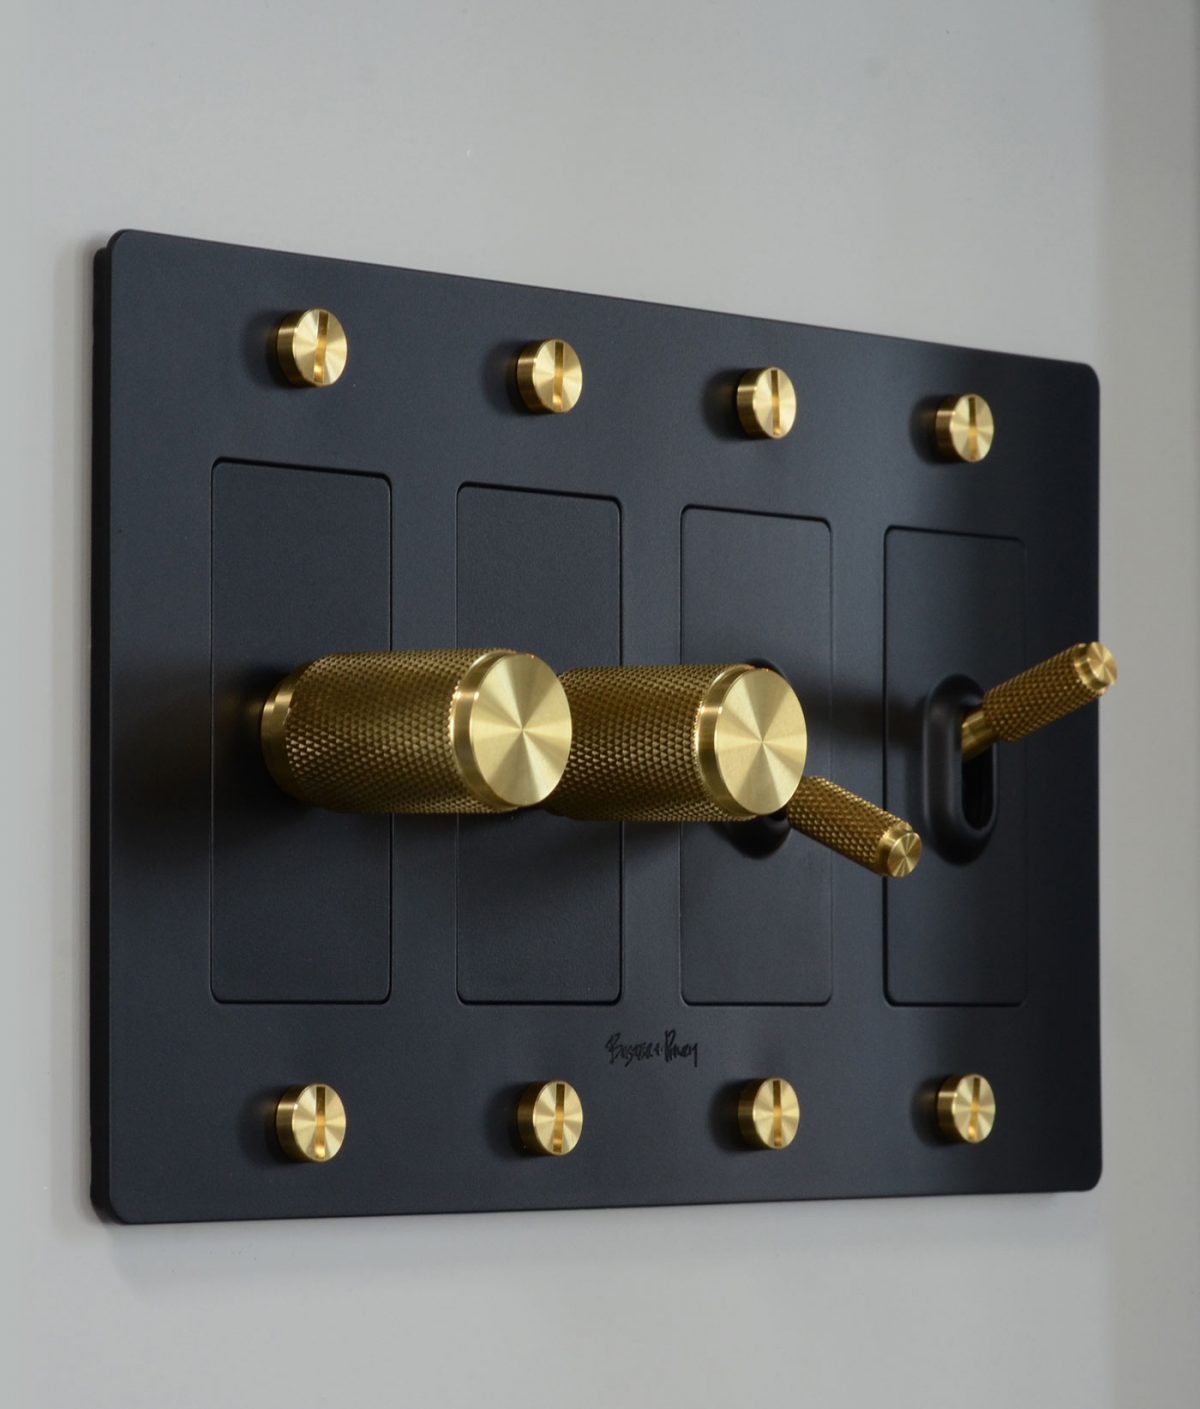 A black and gold light switch pannel with toggles and dimmers